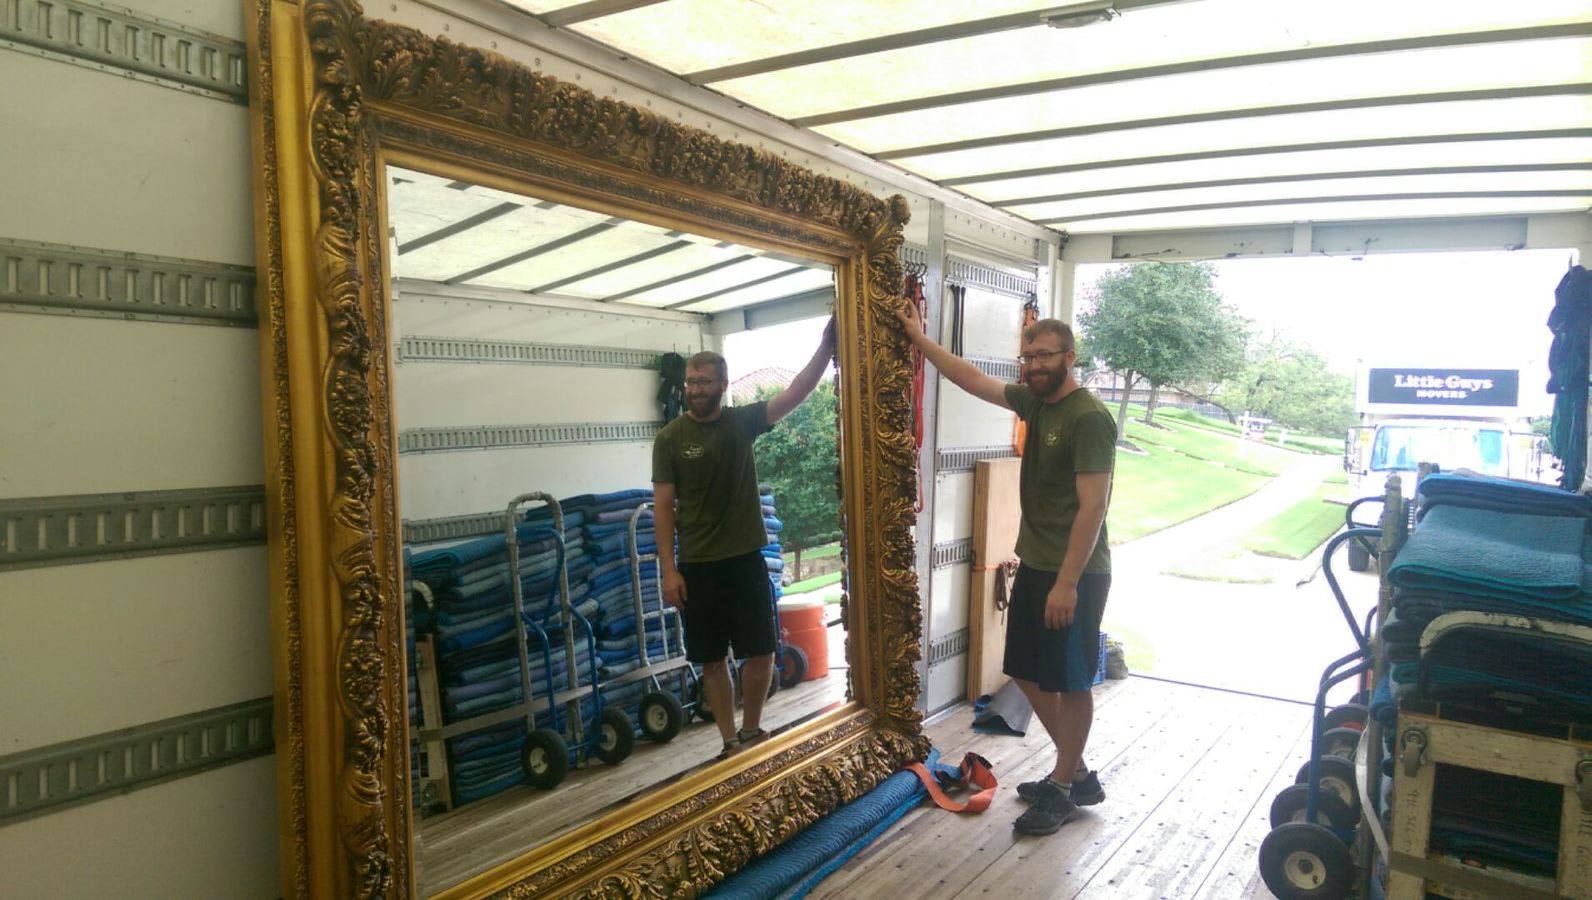 Little Guys mover loading a huge decorative mirror into the truck